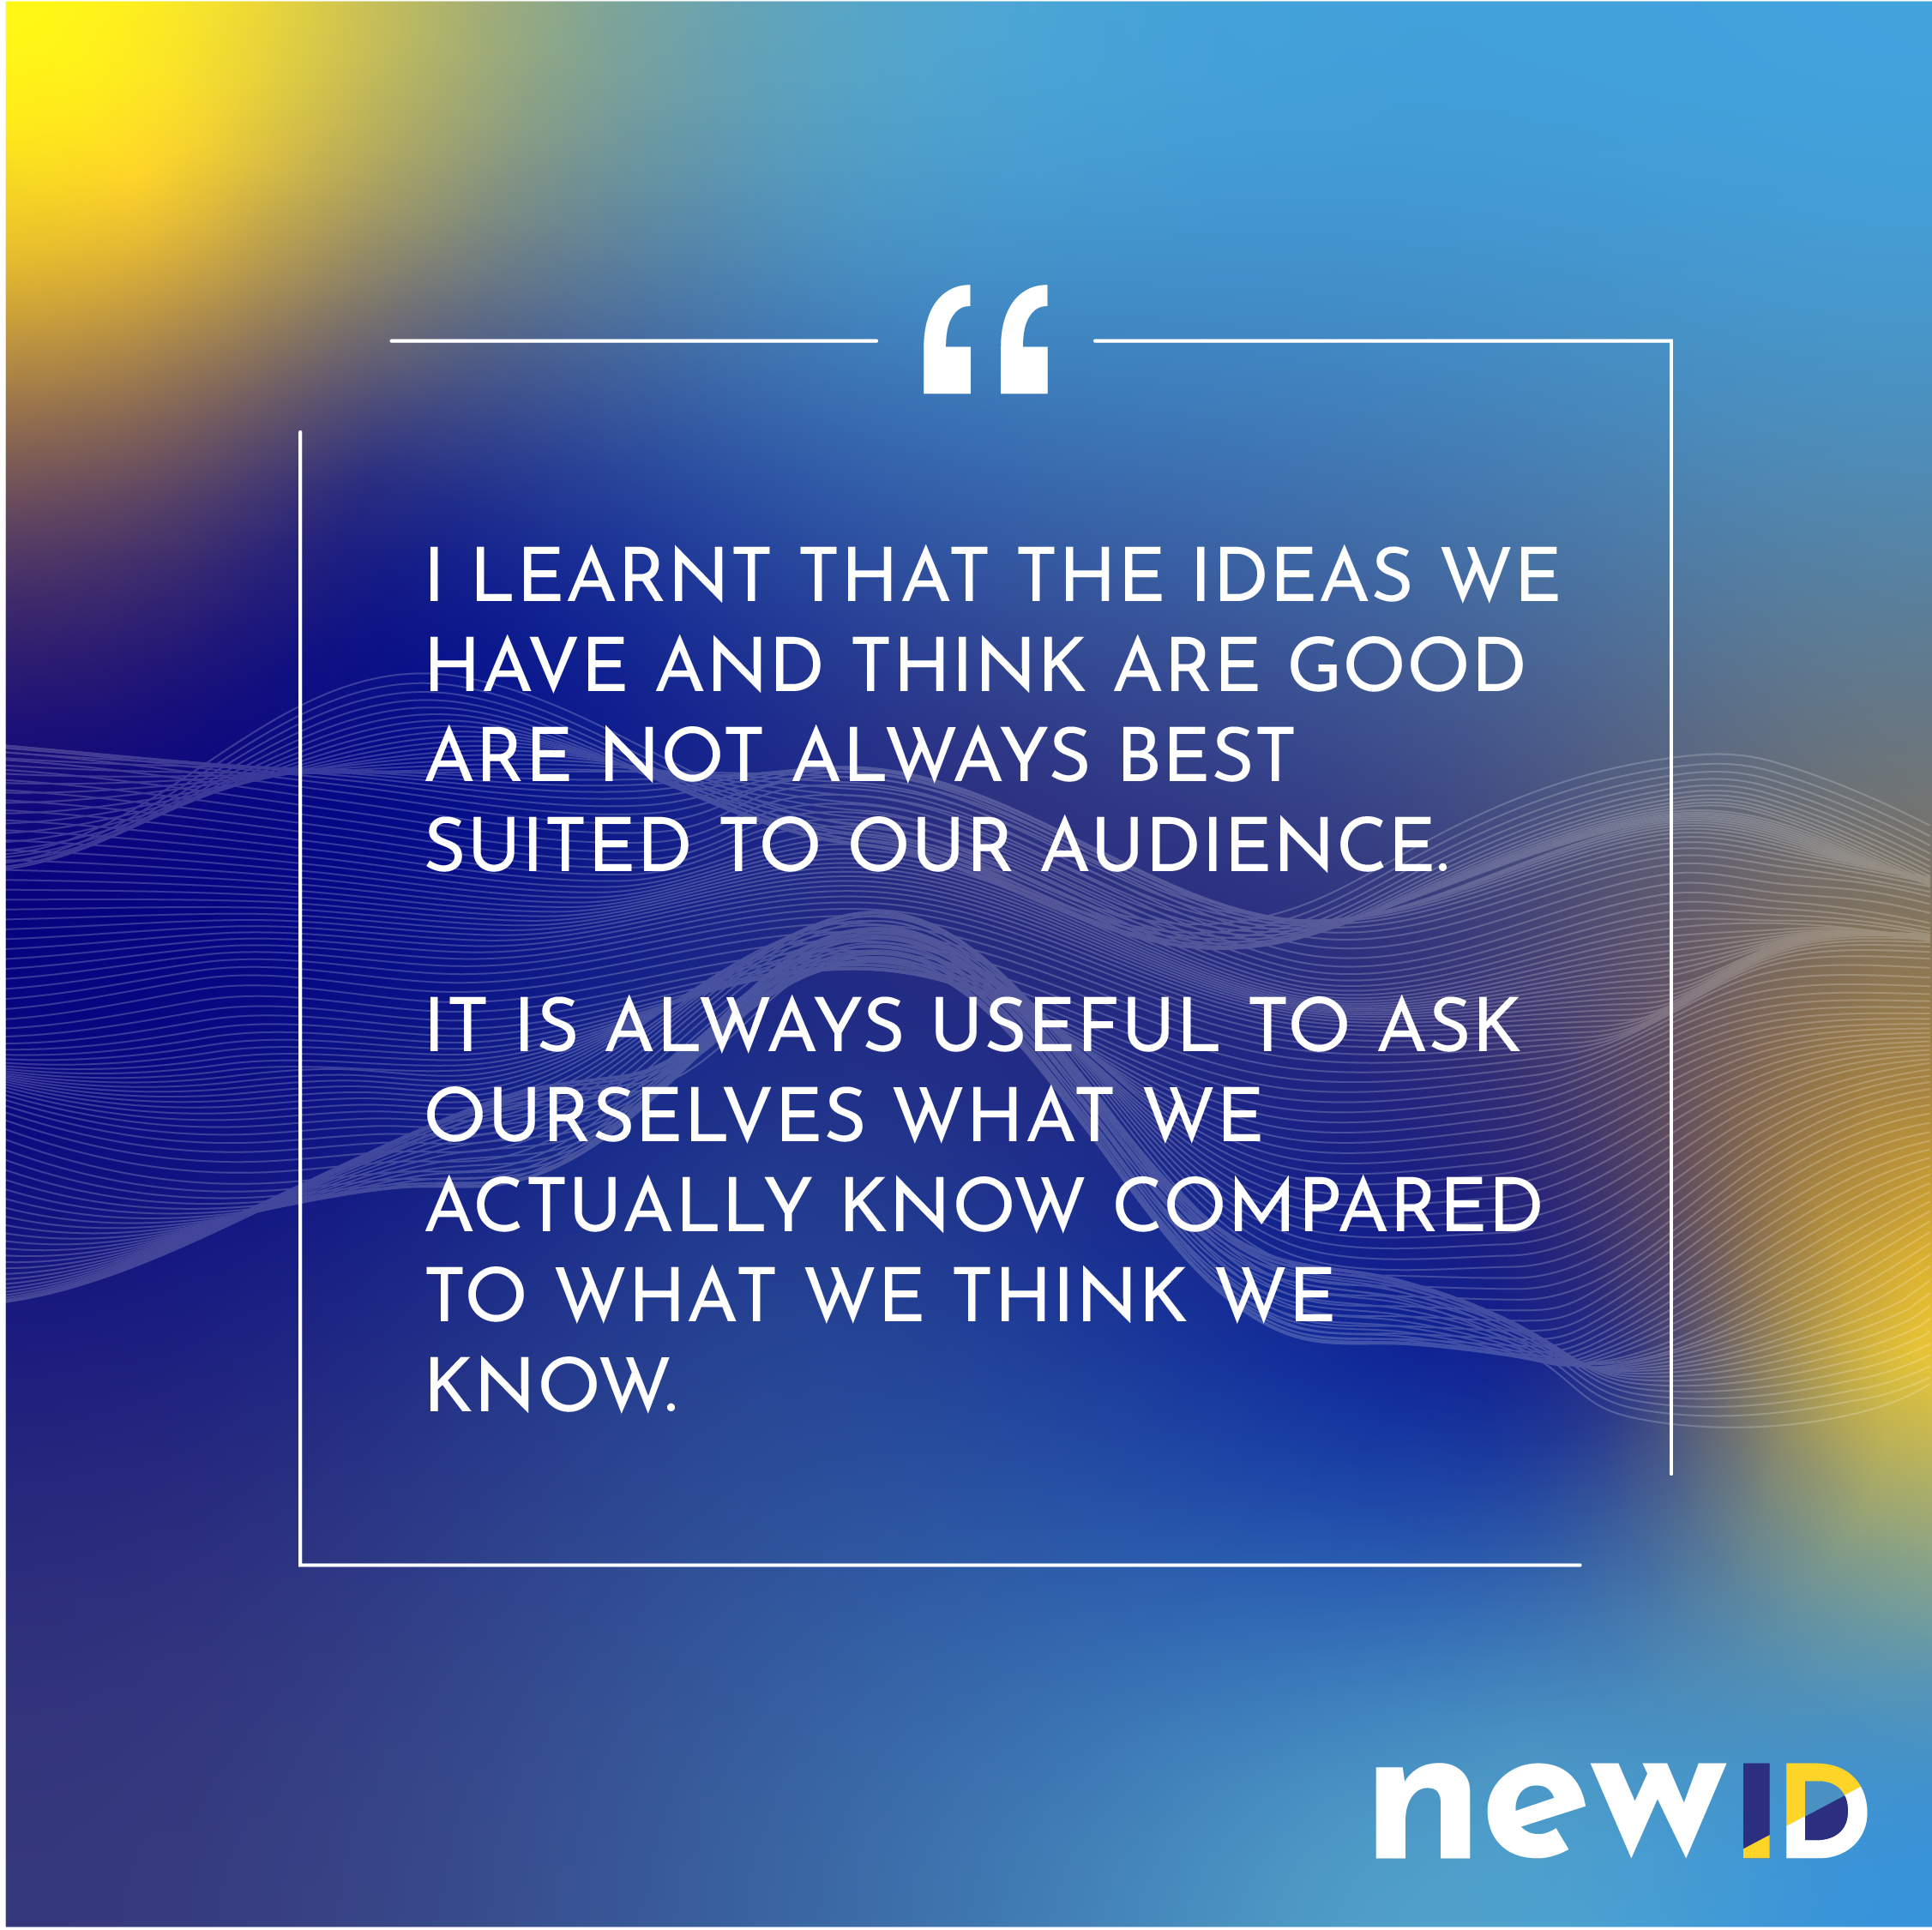 I learnt that the ideas we have and think are good are not always best suited to our audience. It is always useful to ask ourselves what we actually know compared to what we think we know.